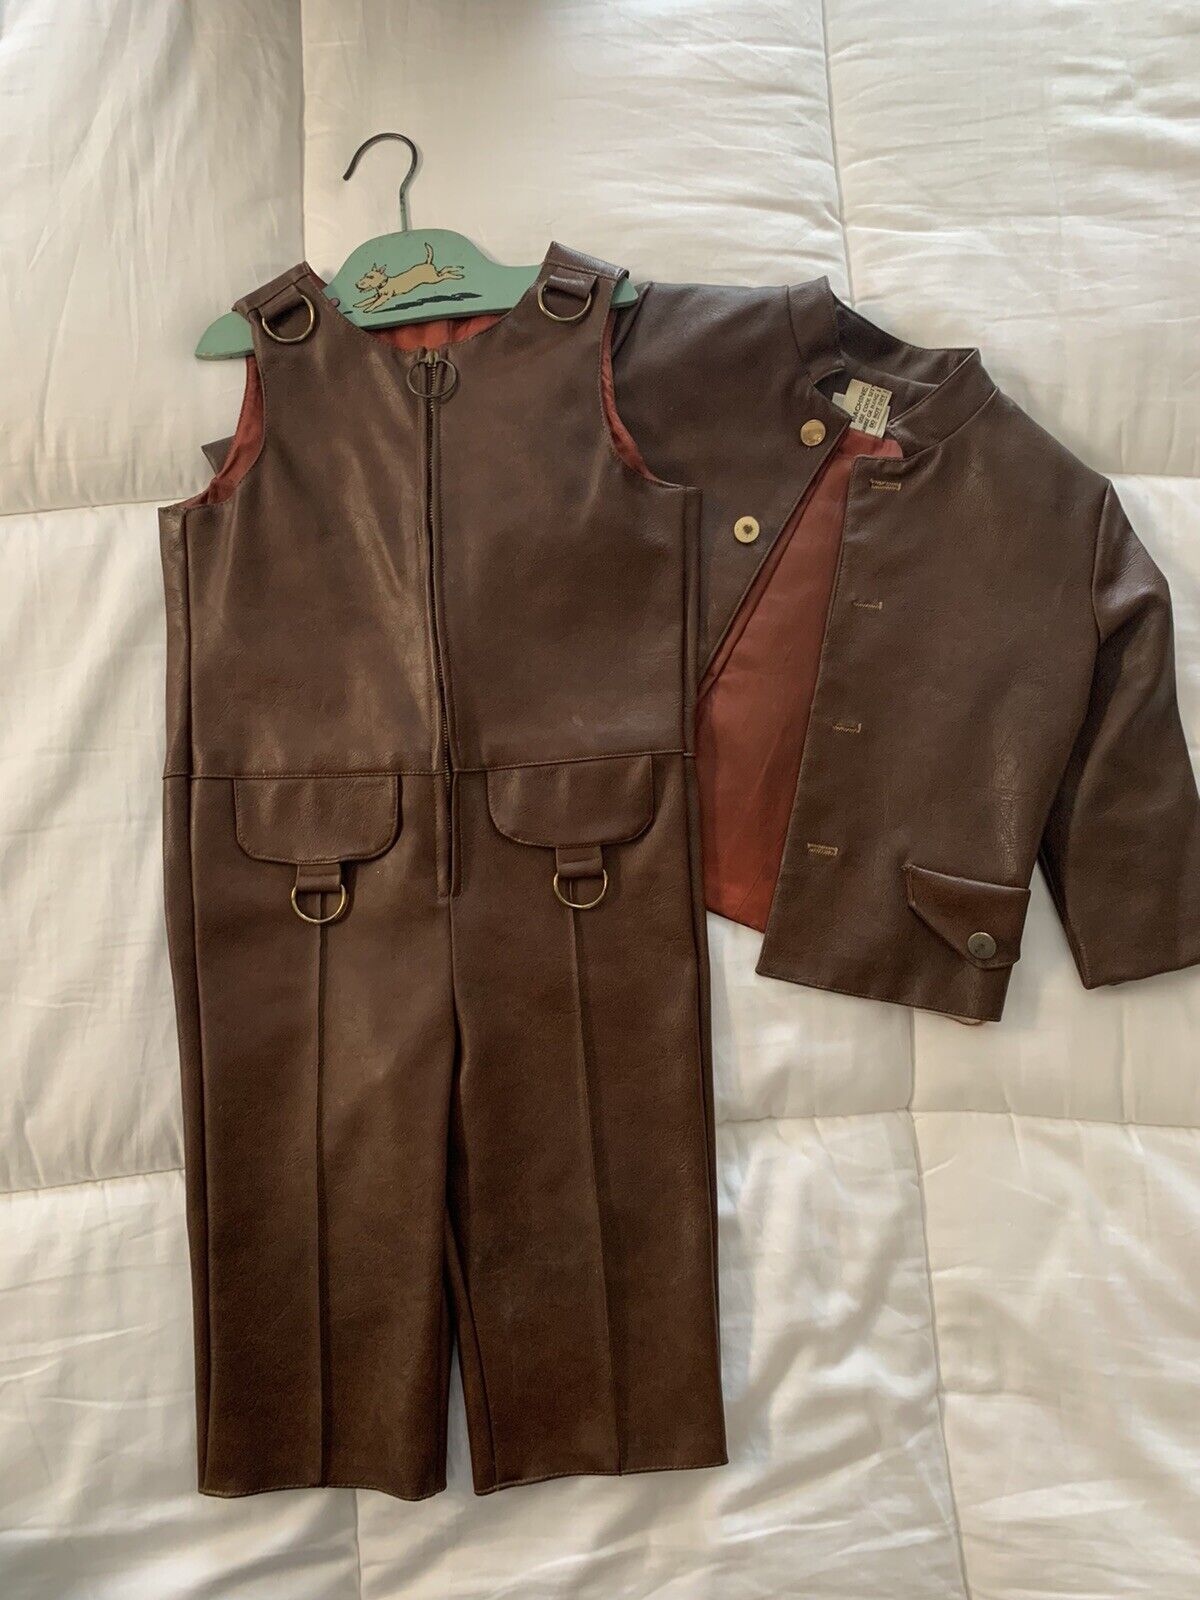 Vintage Moppets Child's Brown Pleather Zip-up Jumpsuit Outfit & Matching Jacket